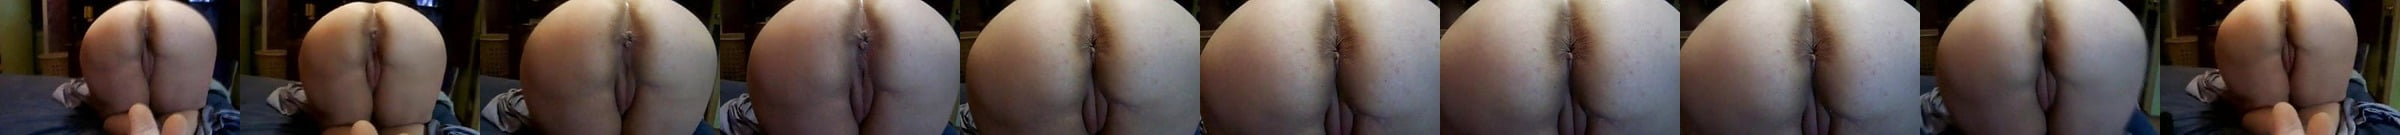 My Wife Ass Hole For Butt Lovers And Voyeurs Free Porn 3f